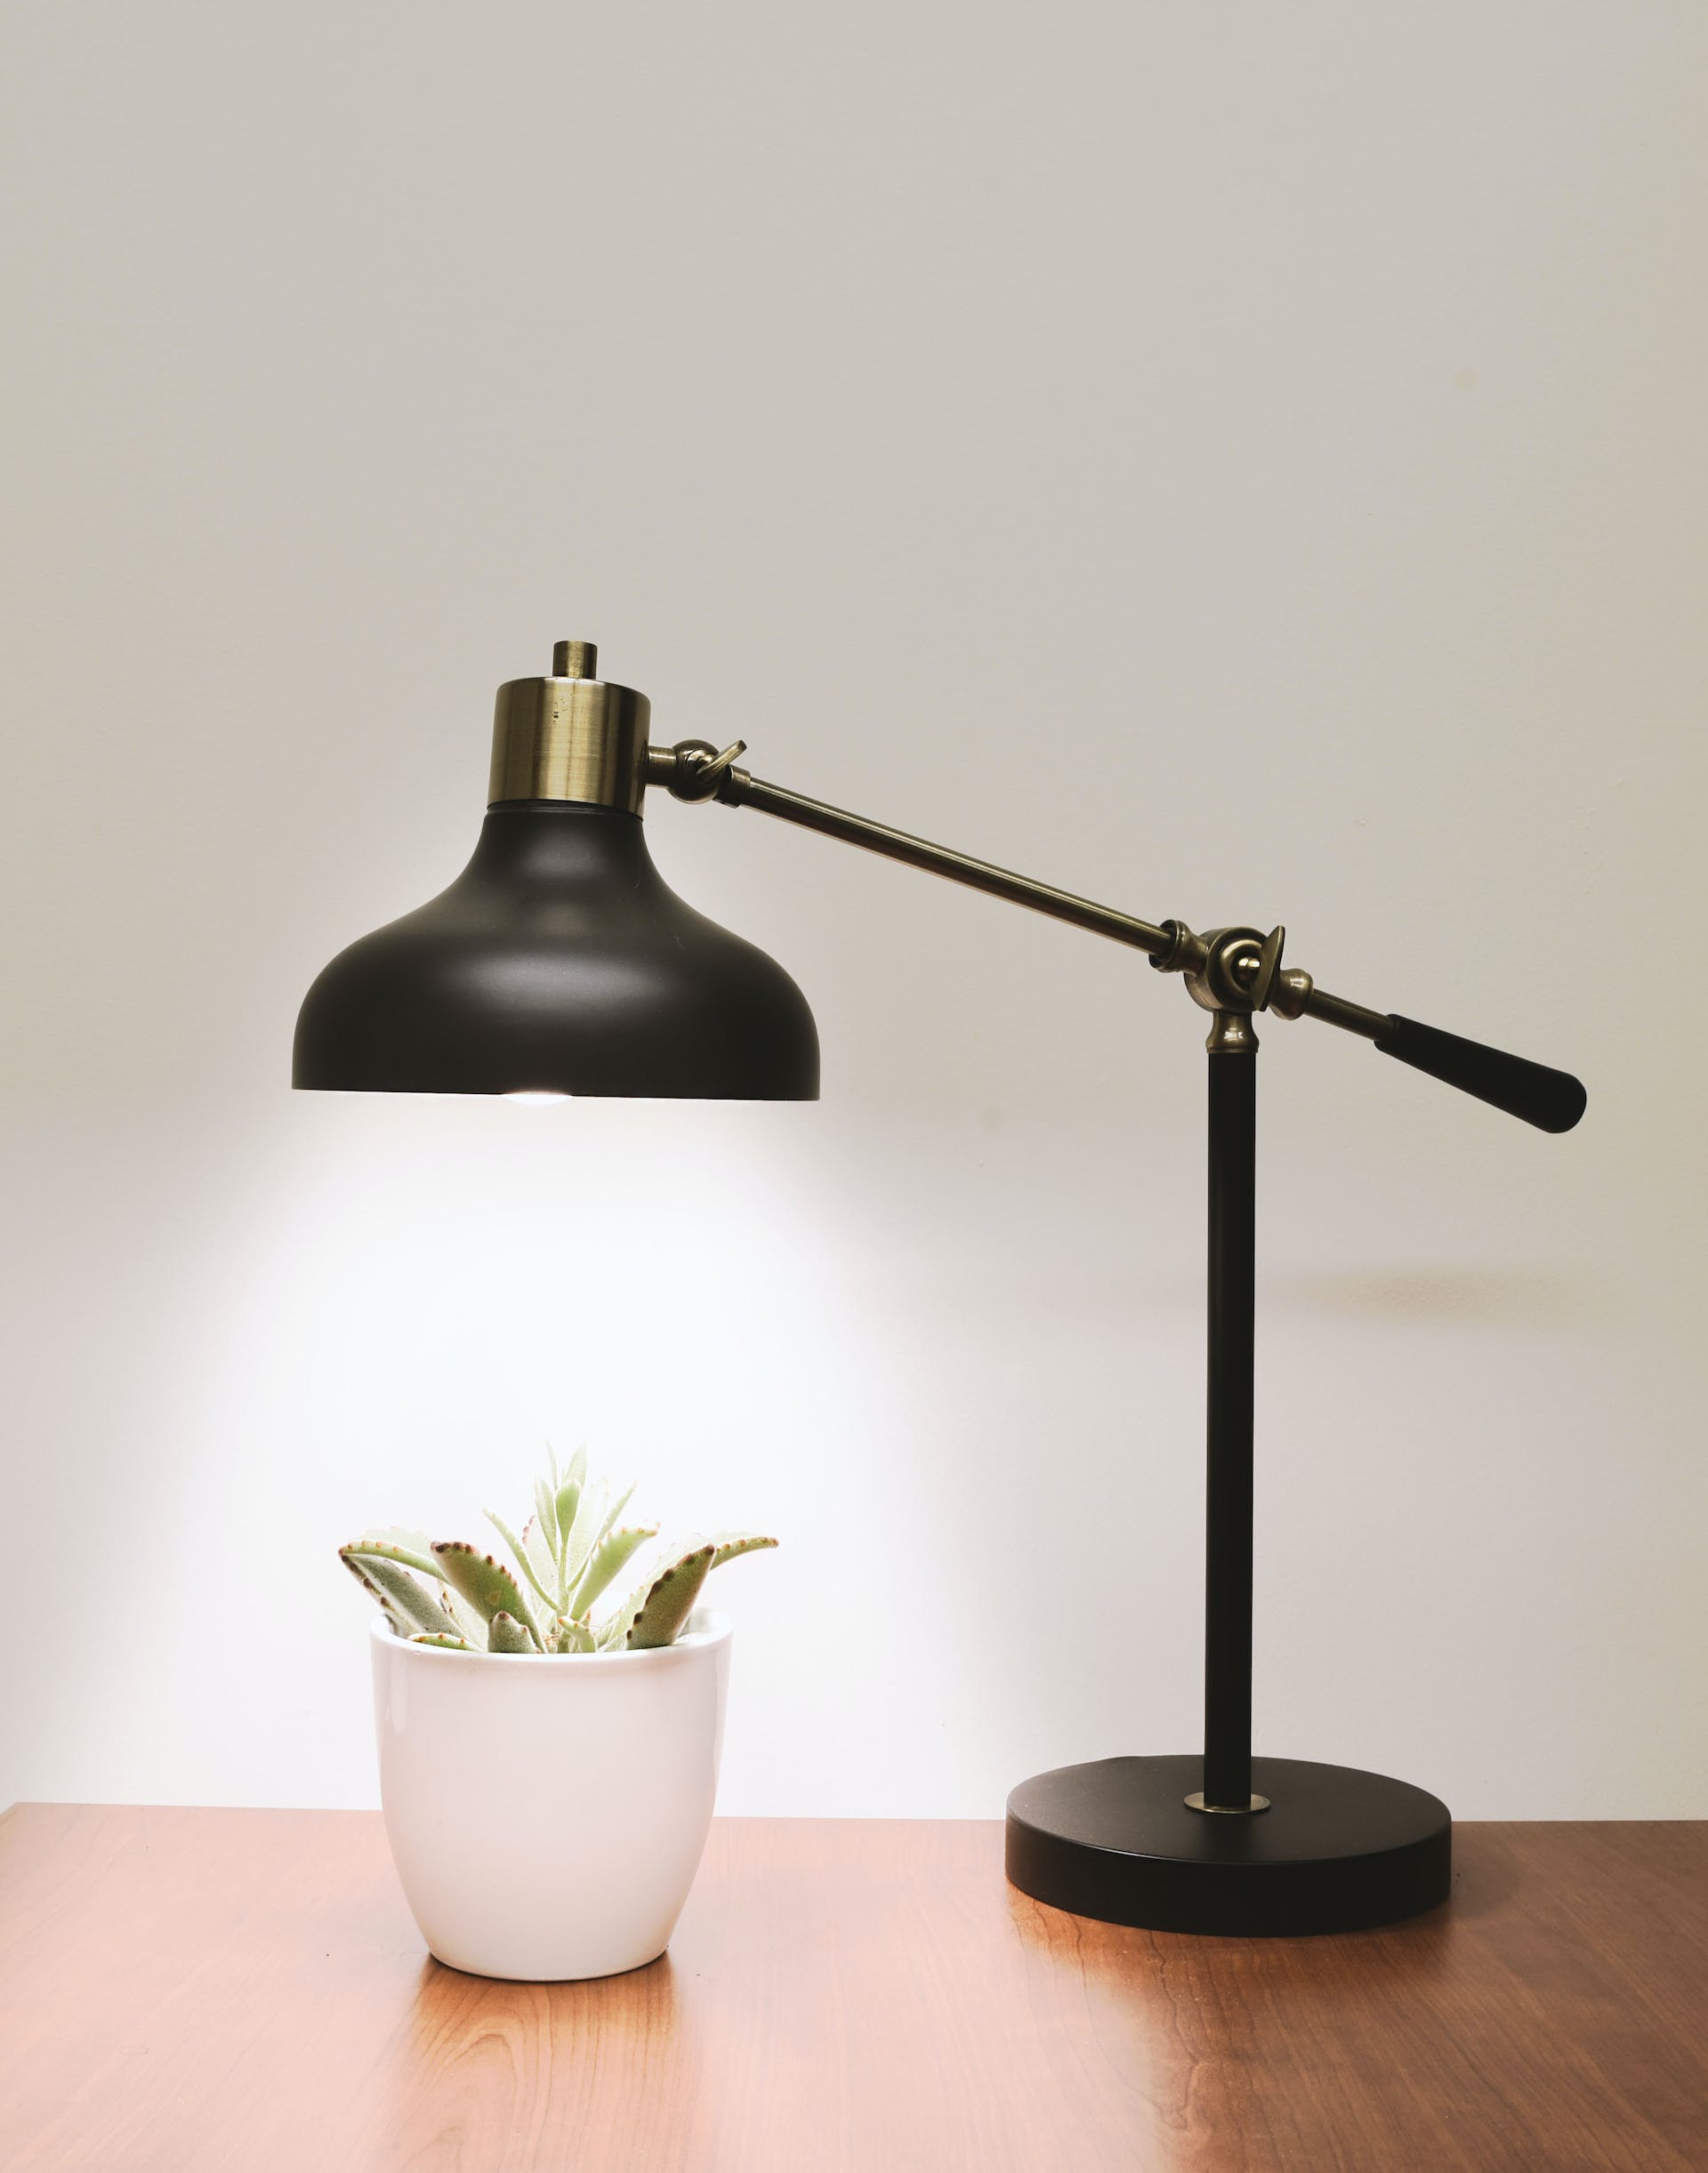 A table lamp with a mini plant | Source: Pexels